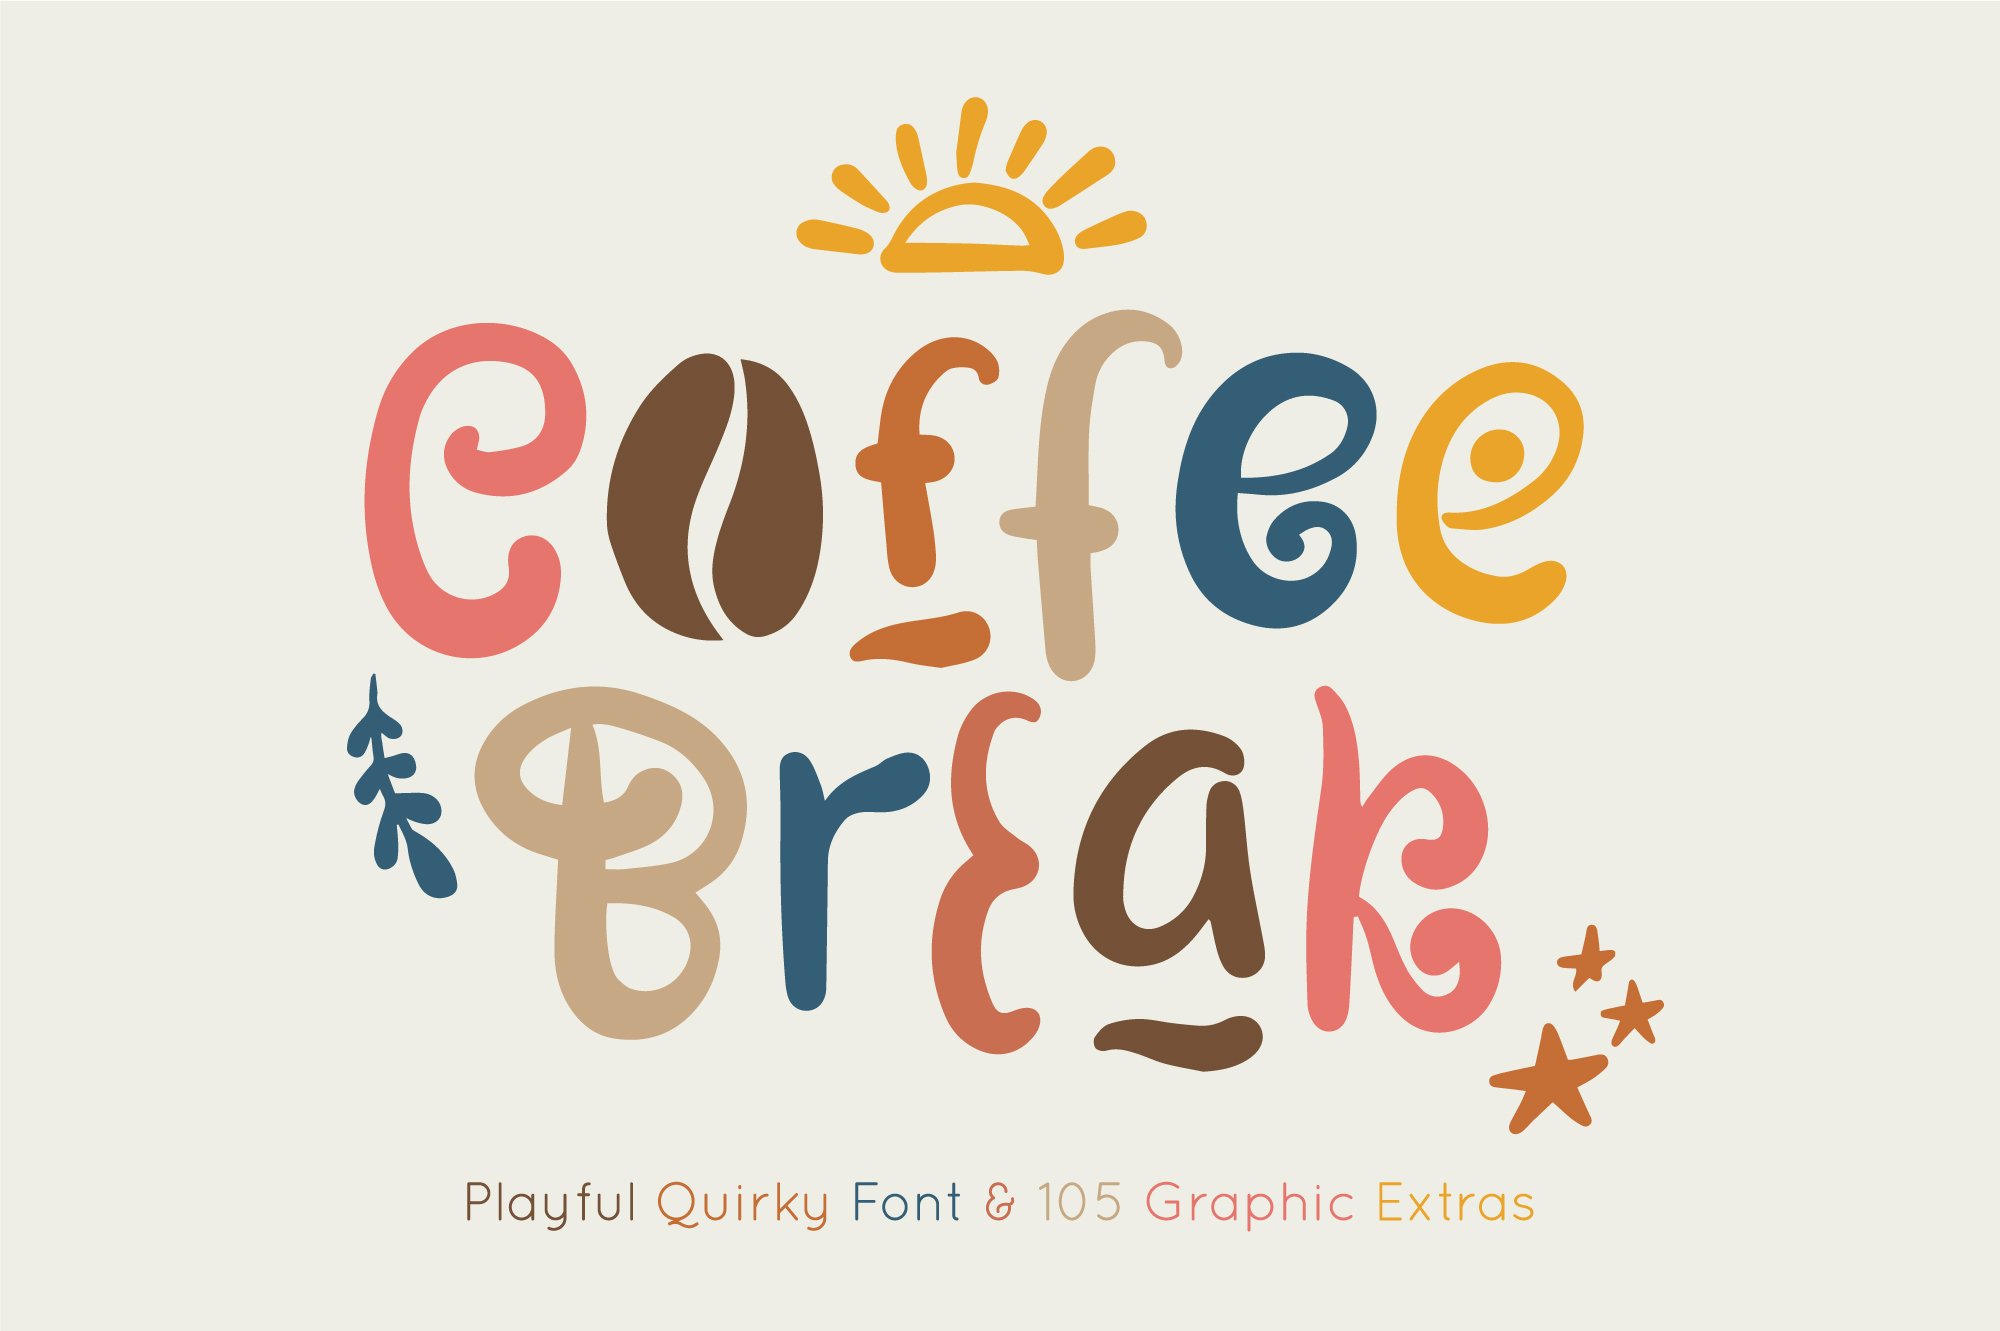 Coffee Break | Playful Font Family cover image.